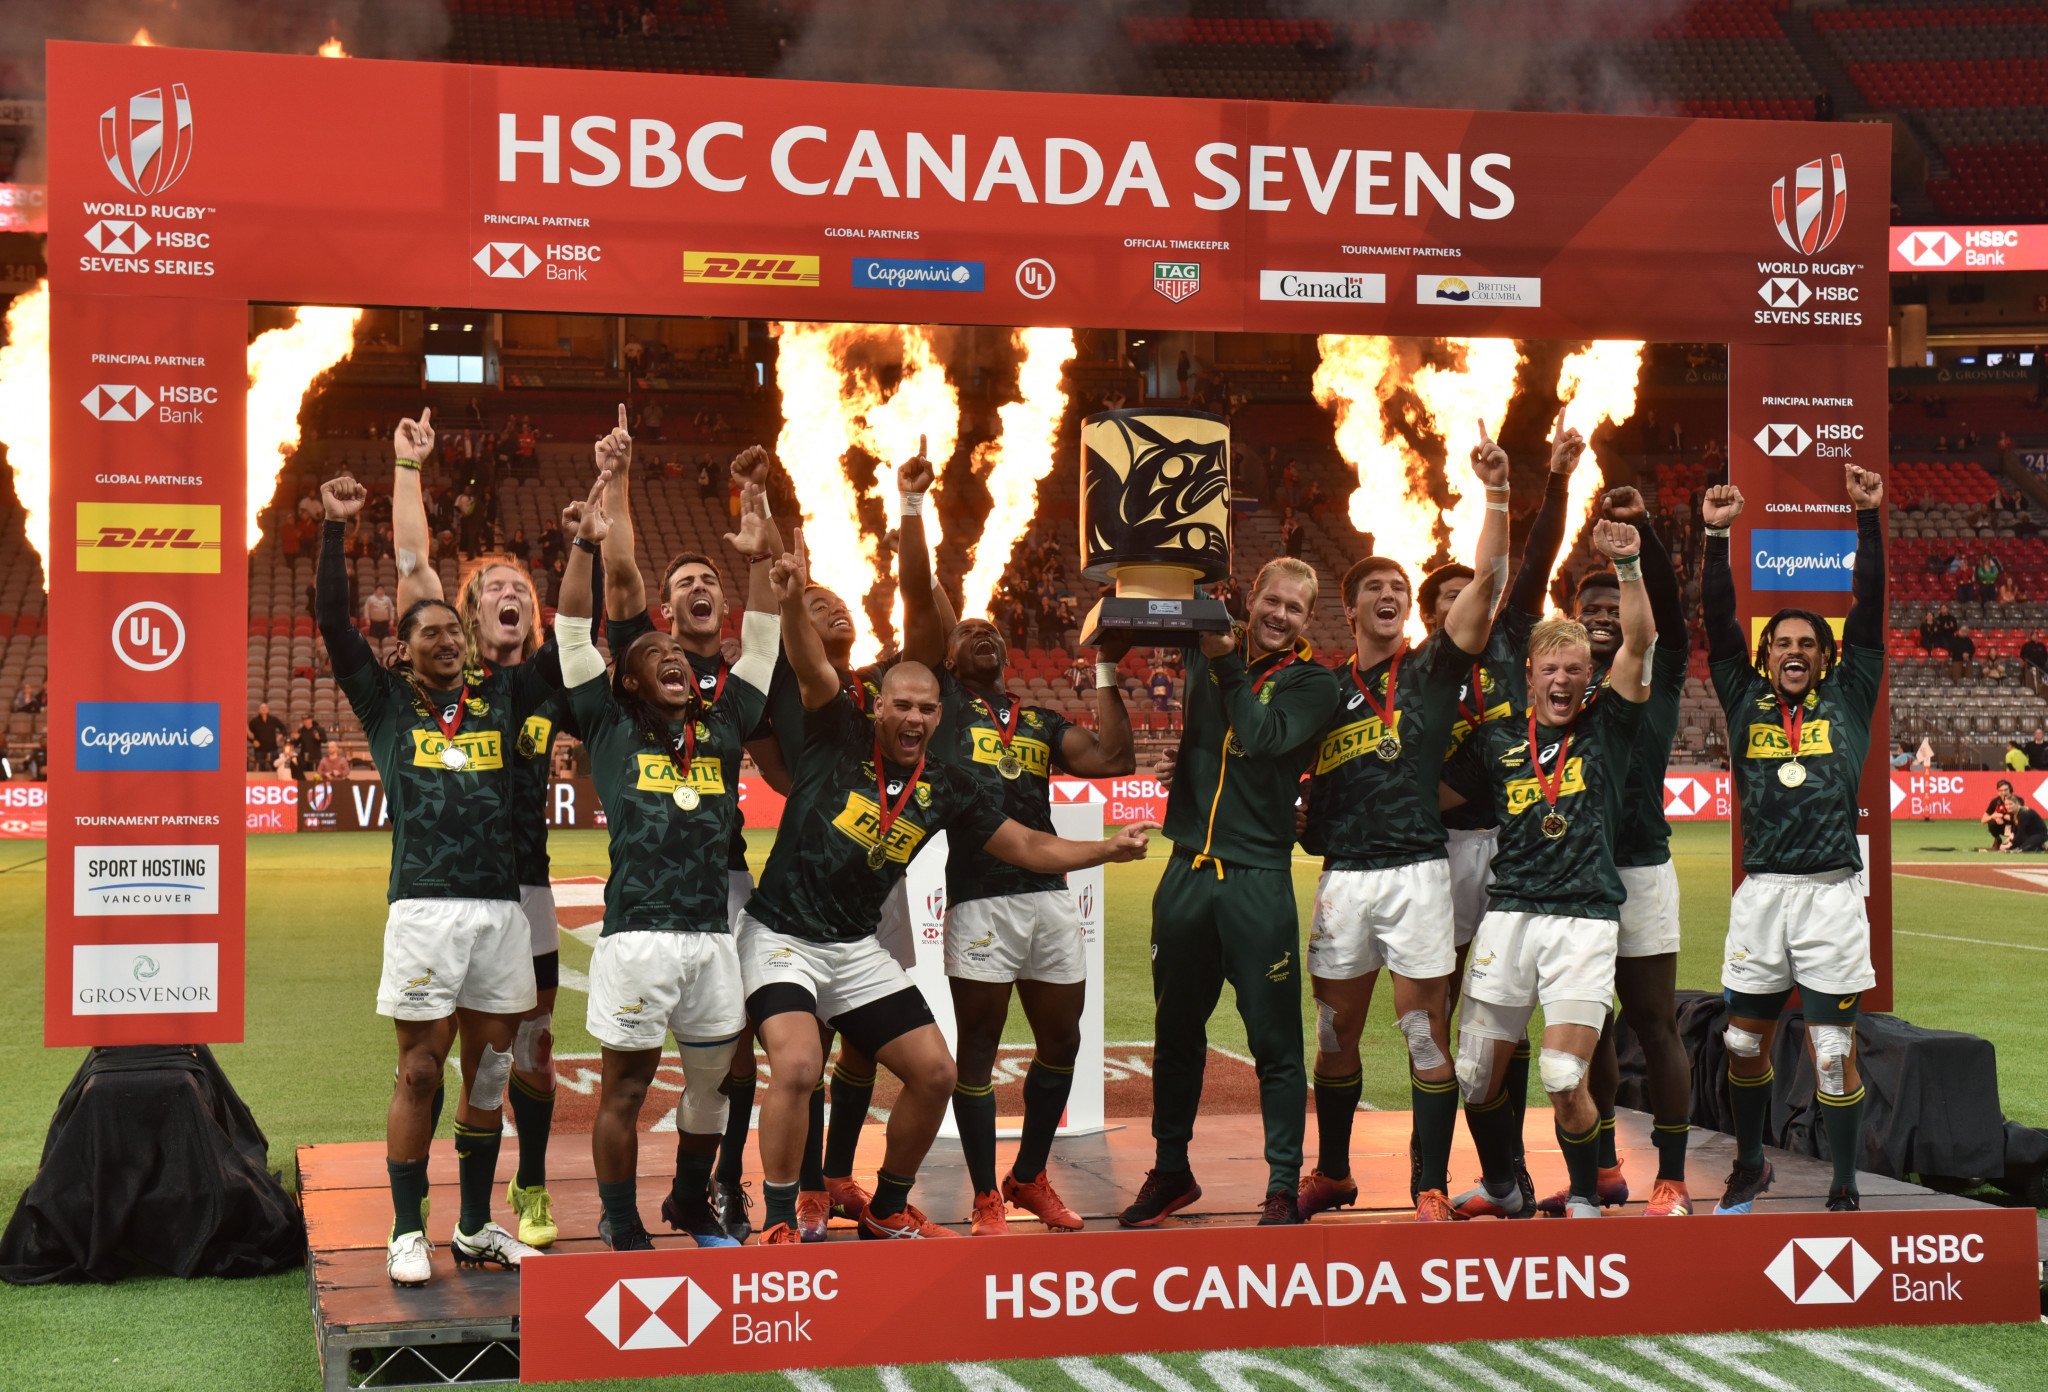 South Africa came from behind to beat France in the World Rugby Canada Sevens final ©Getty Images